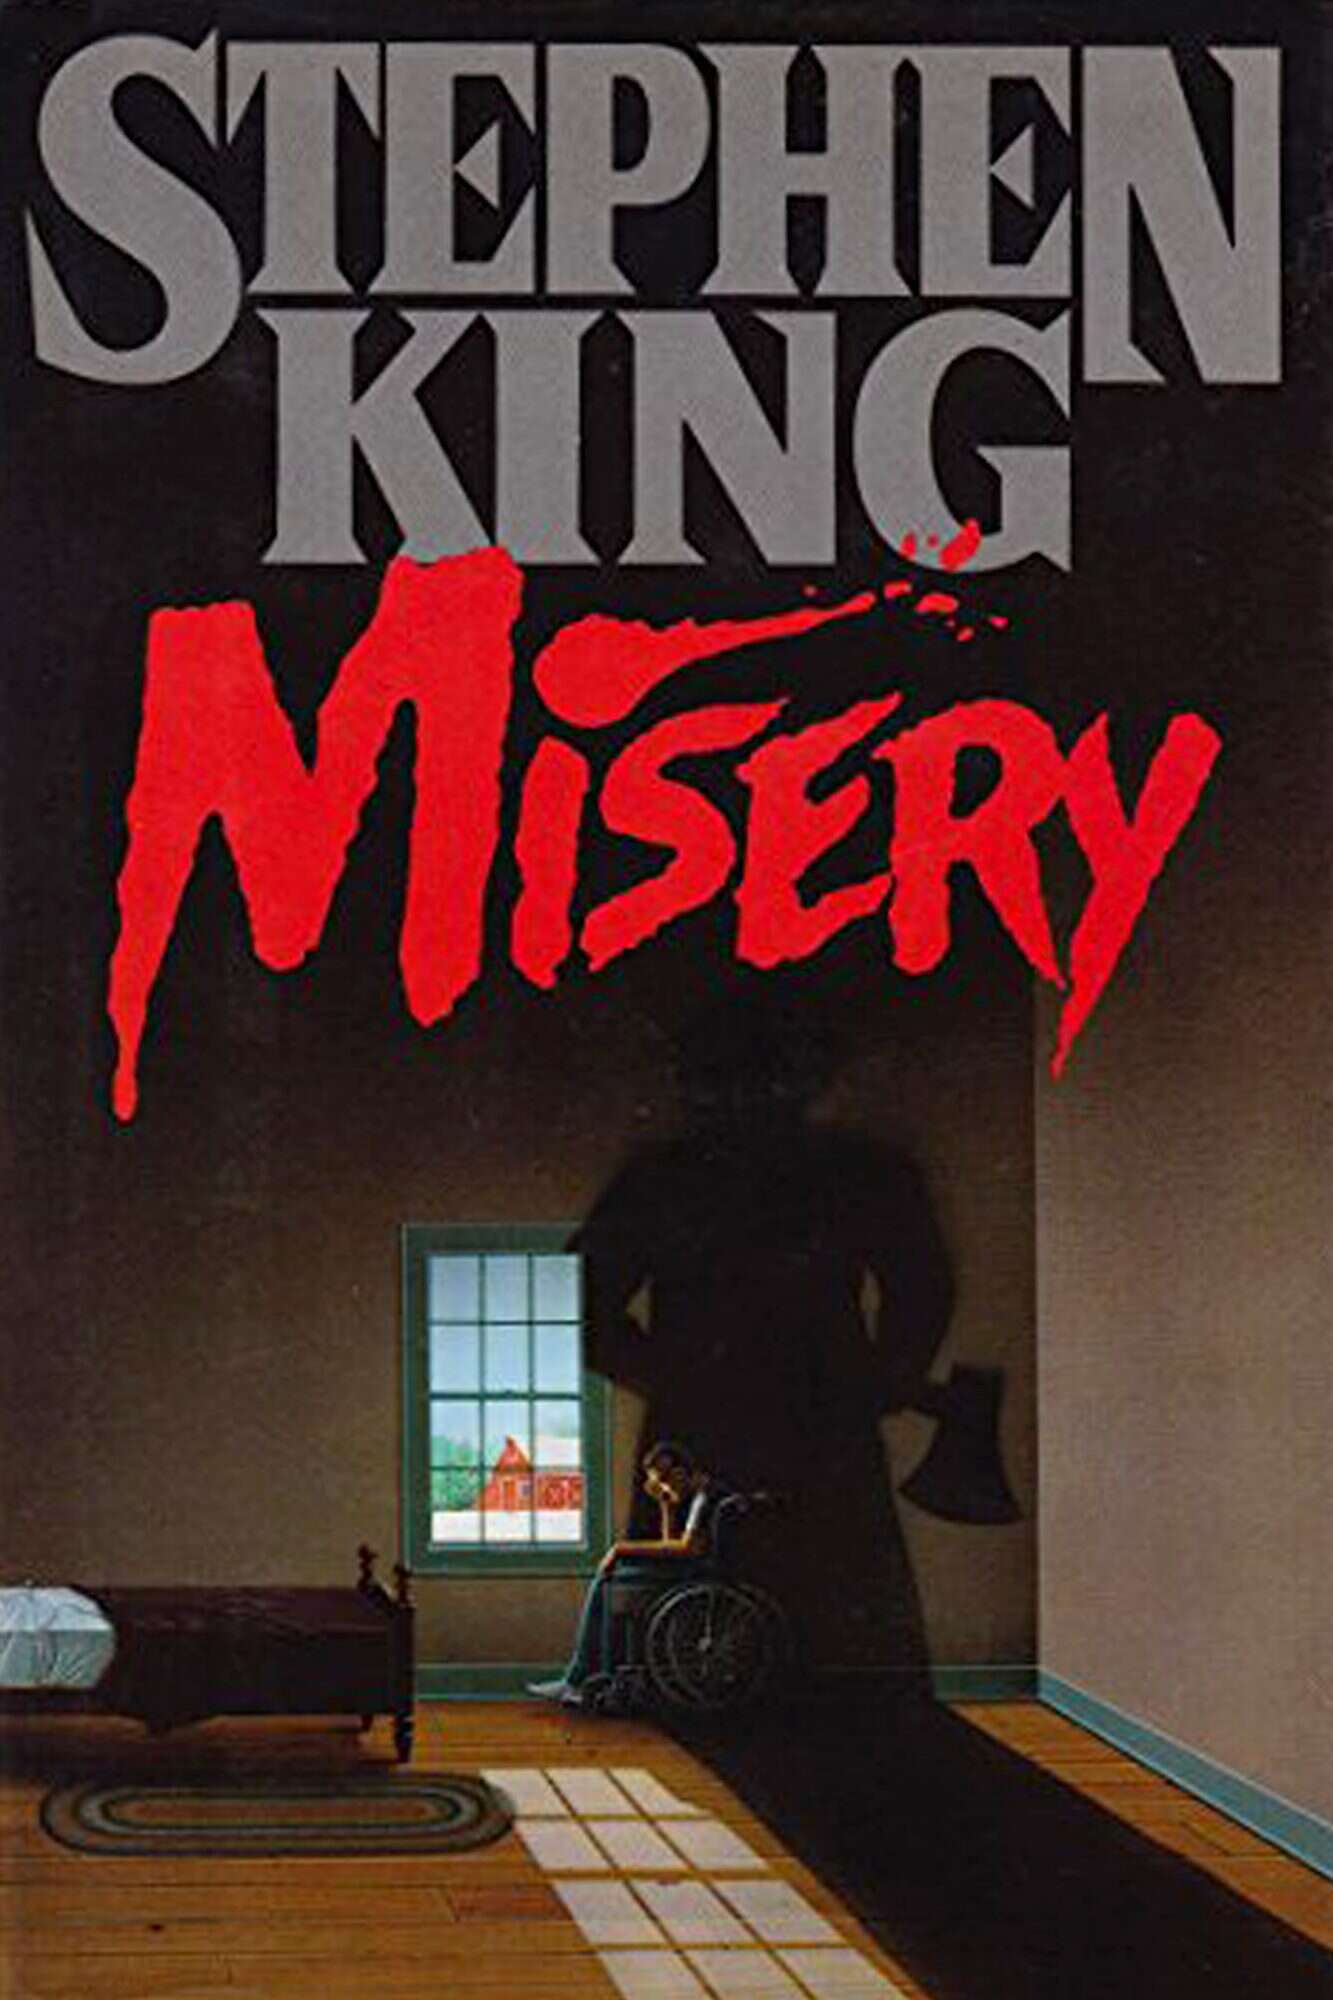 Are Stephen King books suitable for sensitive readers?